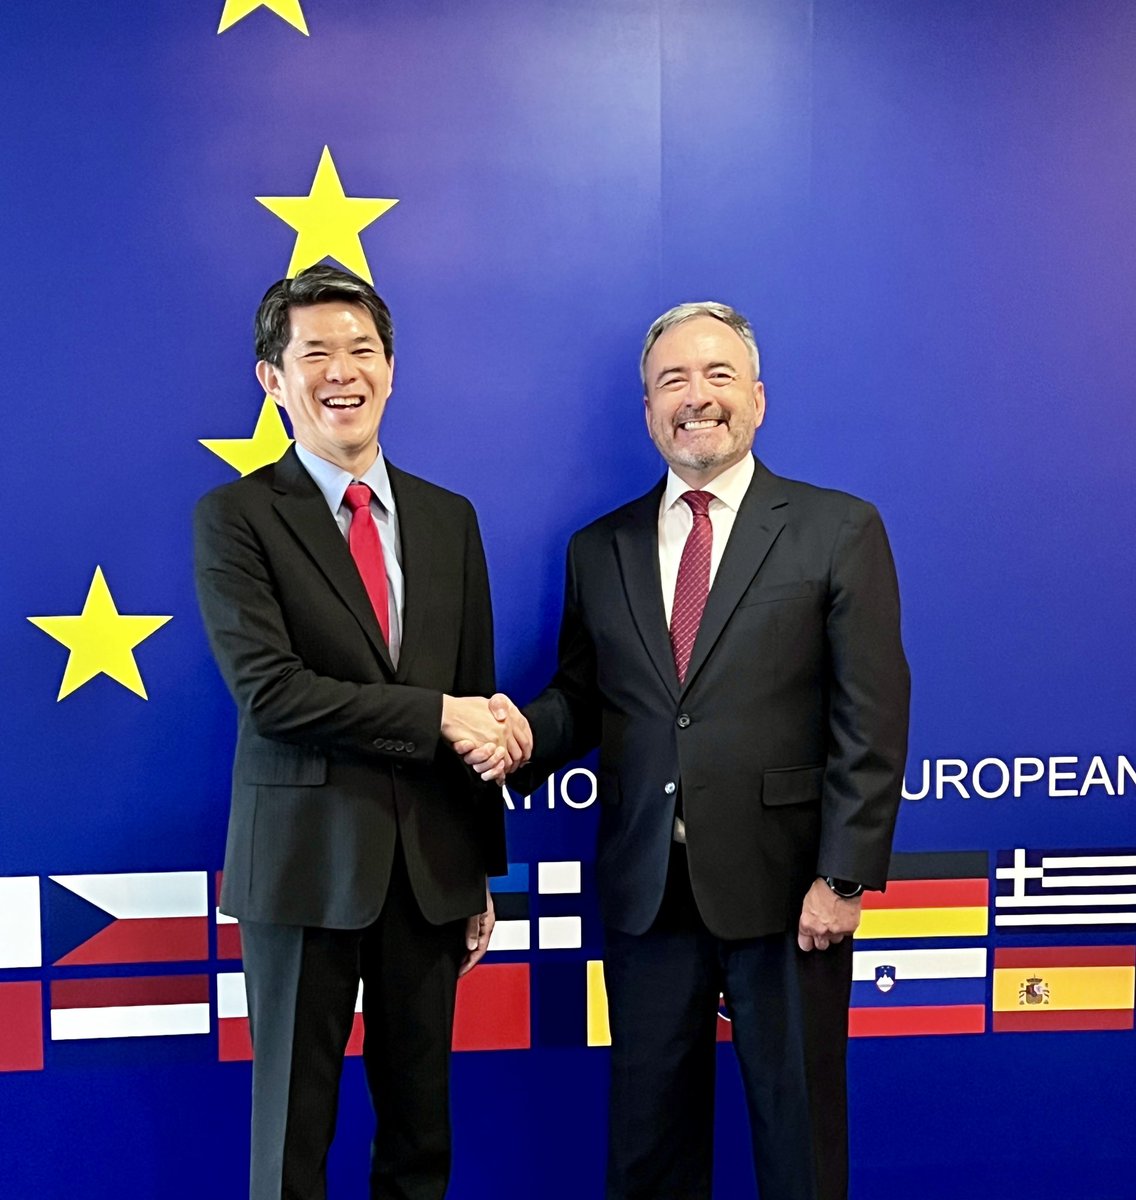 Delighted to welcome 🇯🇵 Ambassador Endo Kazuya @AmbJPNinPH! The longstanding partnership between the European Union and Japan demonstrates our shared commitment to promoting peace and stability in this region. I look forward to working together to strengthen our ties and